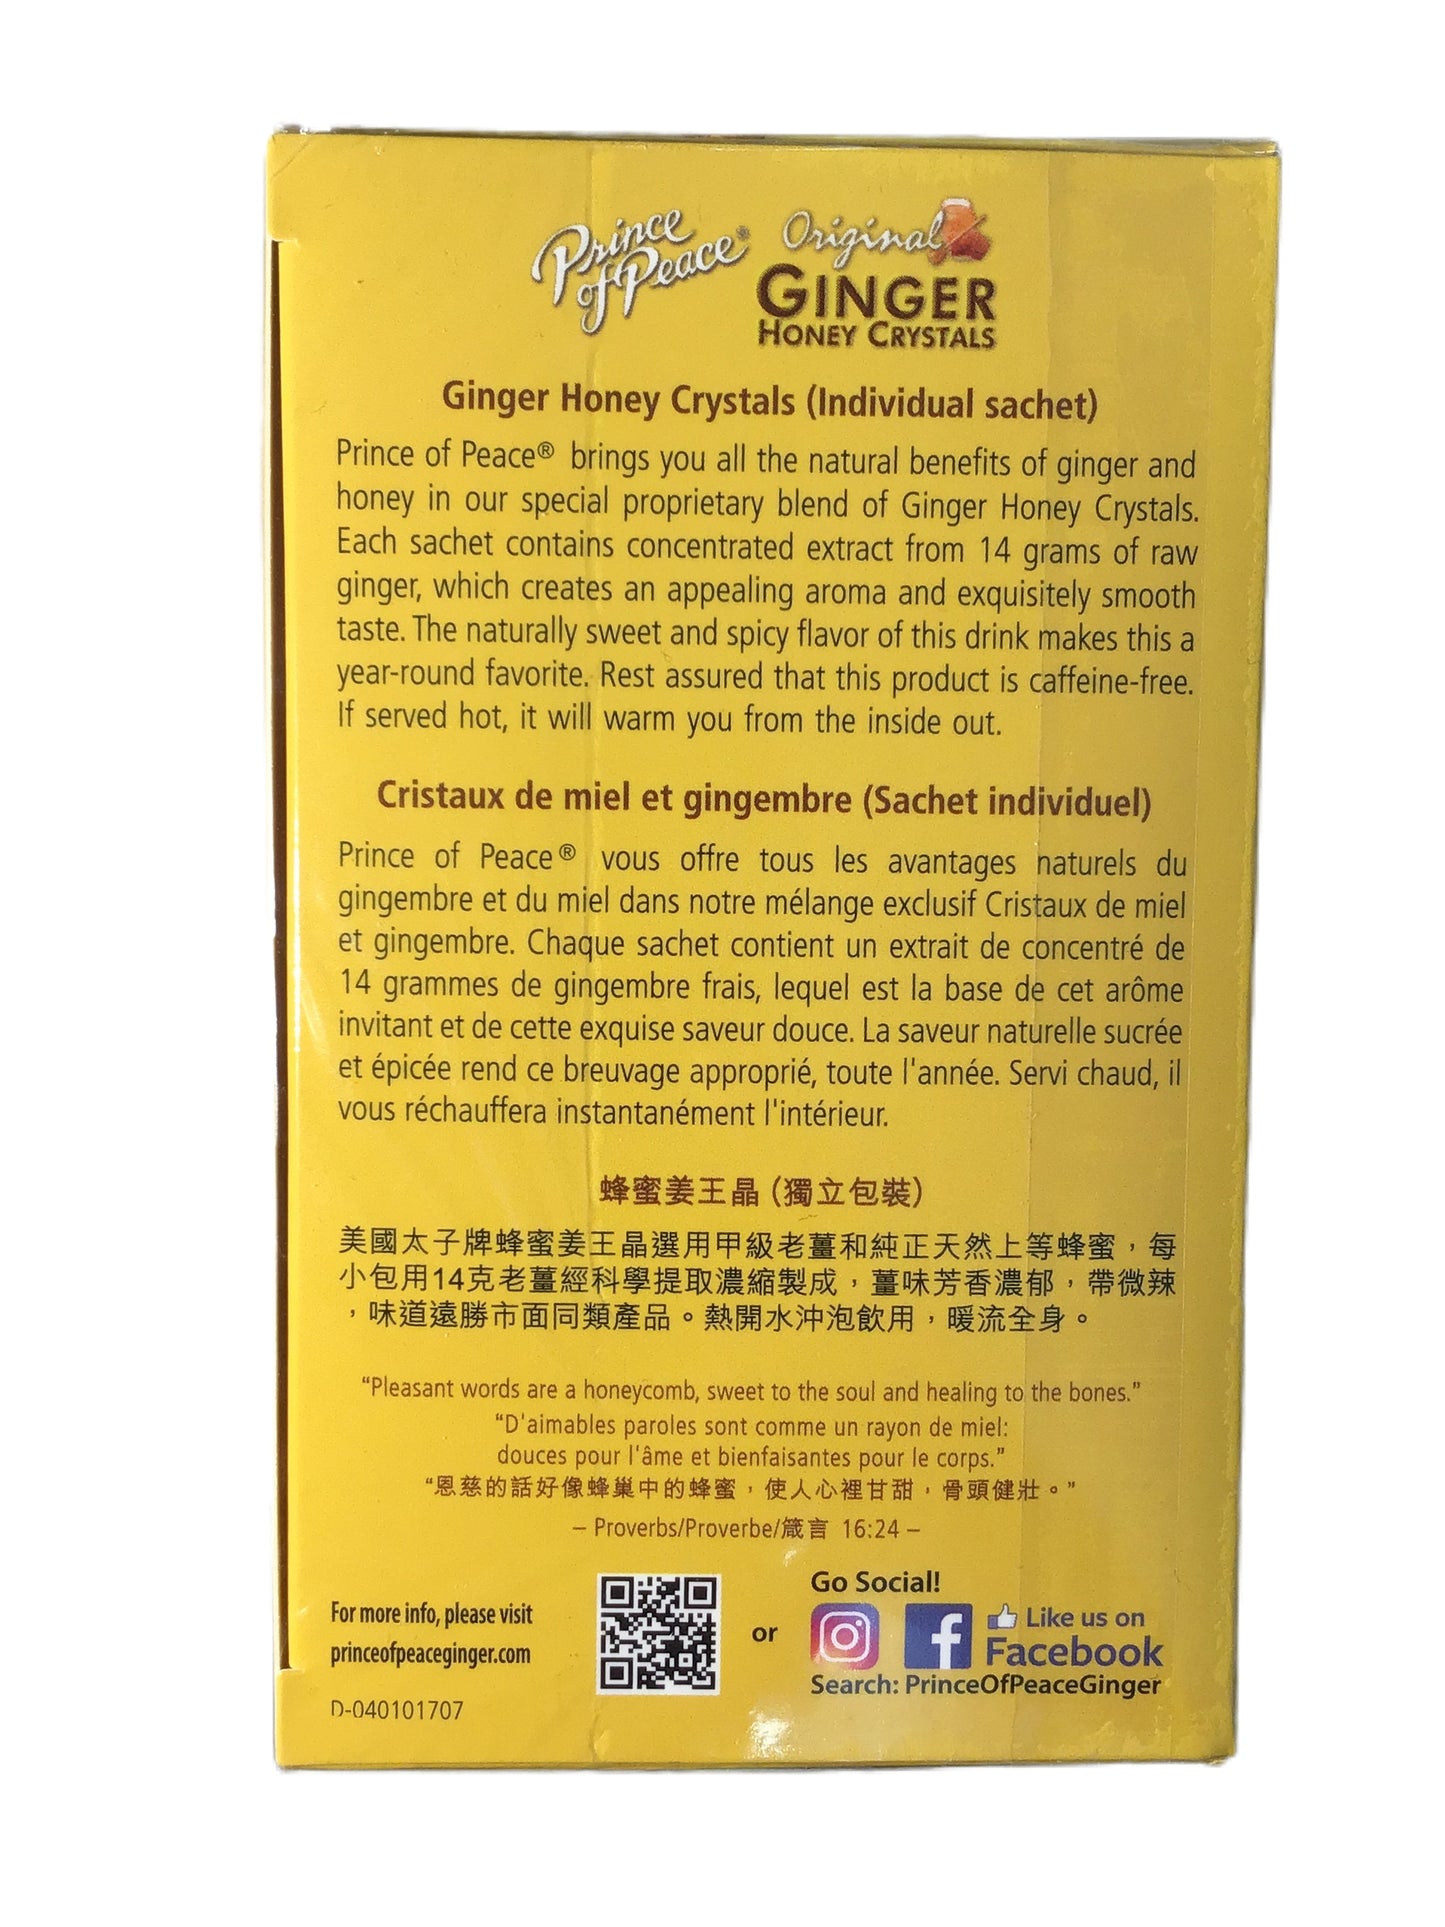 Prince of Peace 太子牌 Ginger Honey Crystals 薑王晶